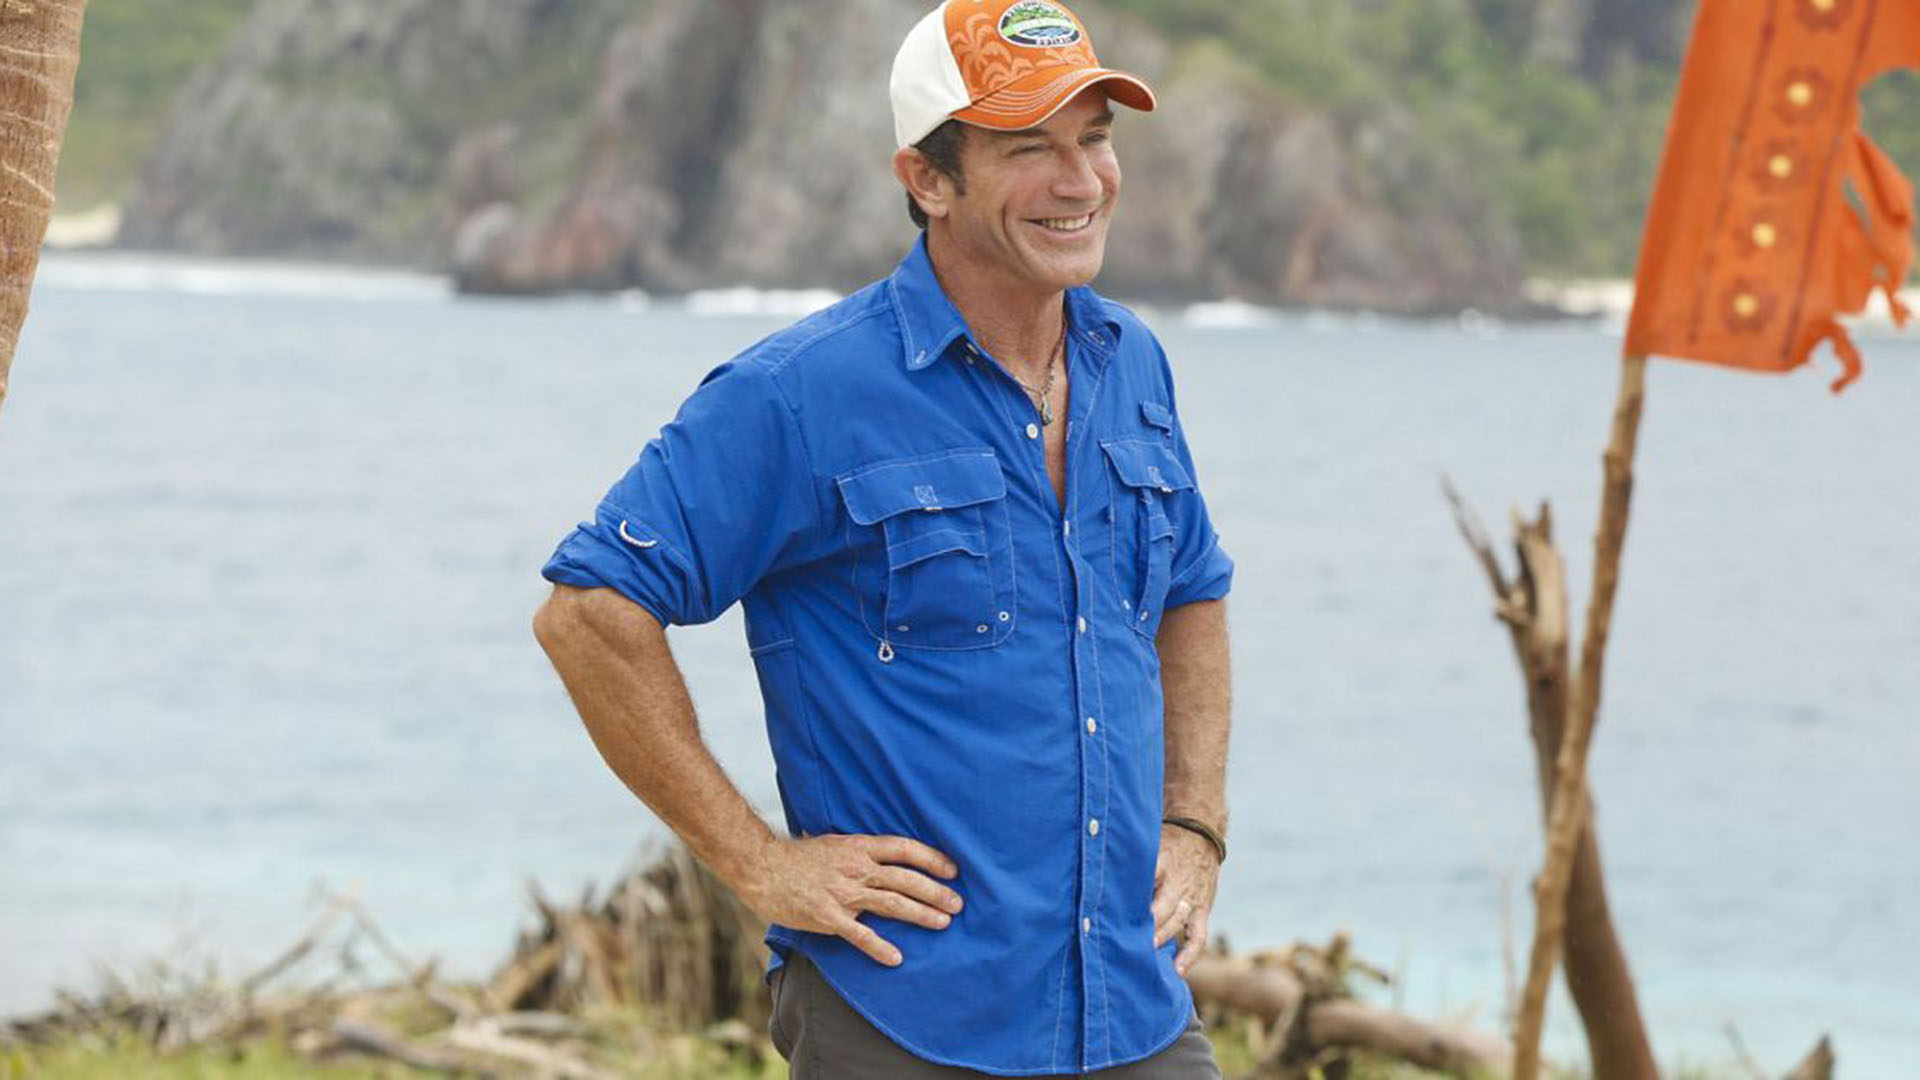 Survivor by the numbers